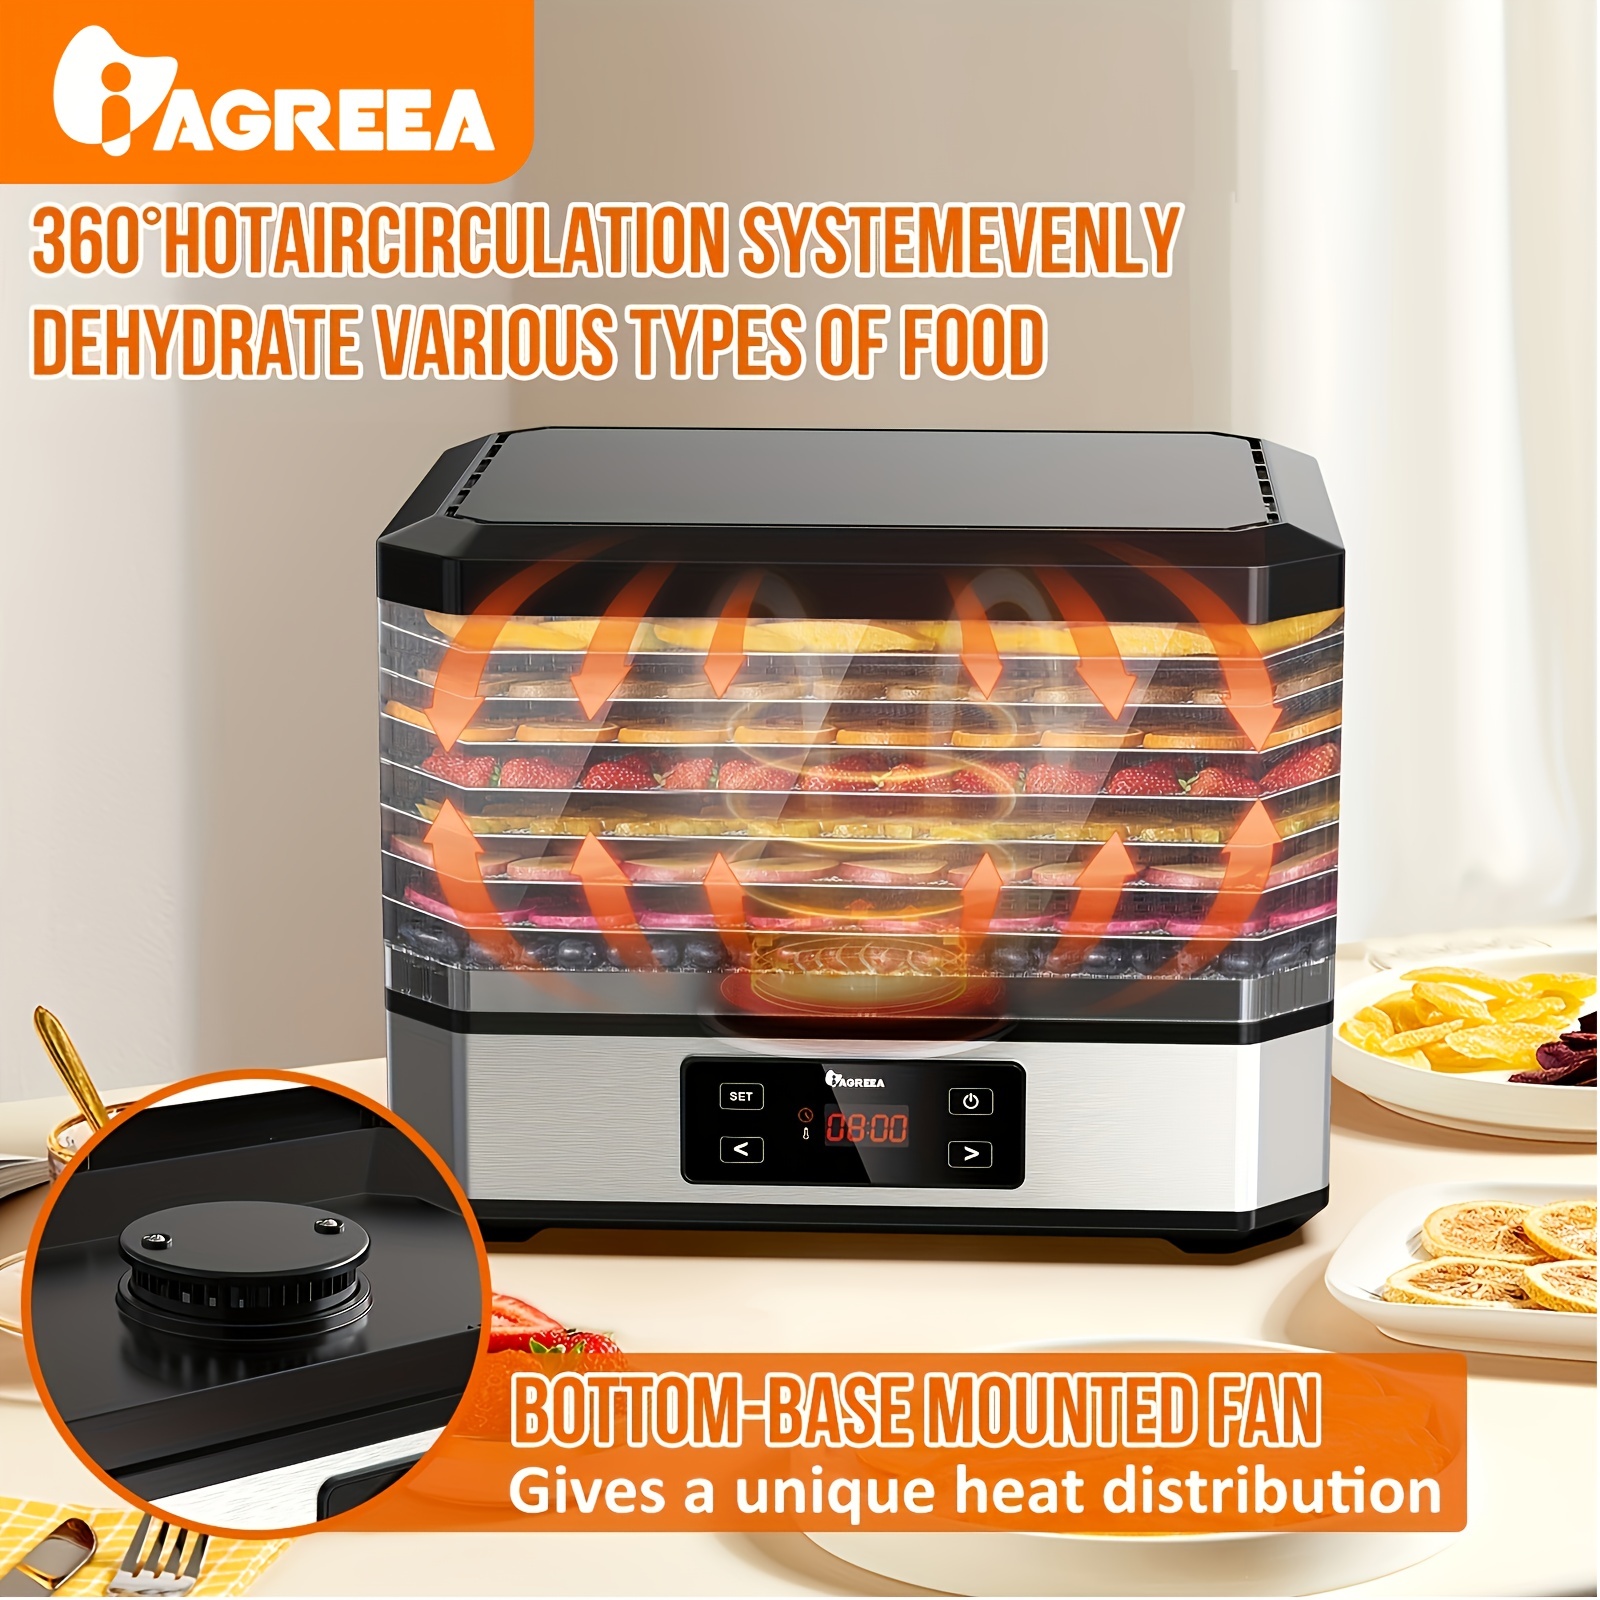 Food Dehydrator Machine, 400W Electric Fruit Dryer with 8 Trays, Digital  Timer and Temperature Control, for Jerky/Meat/Beef/Vegetable